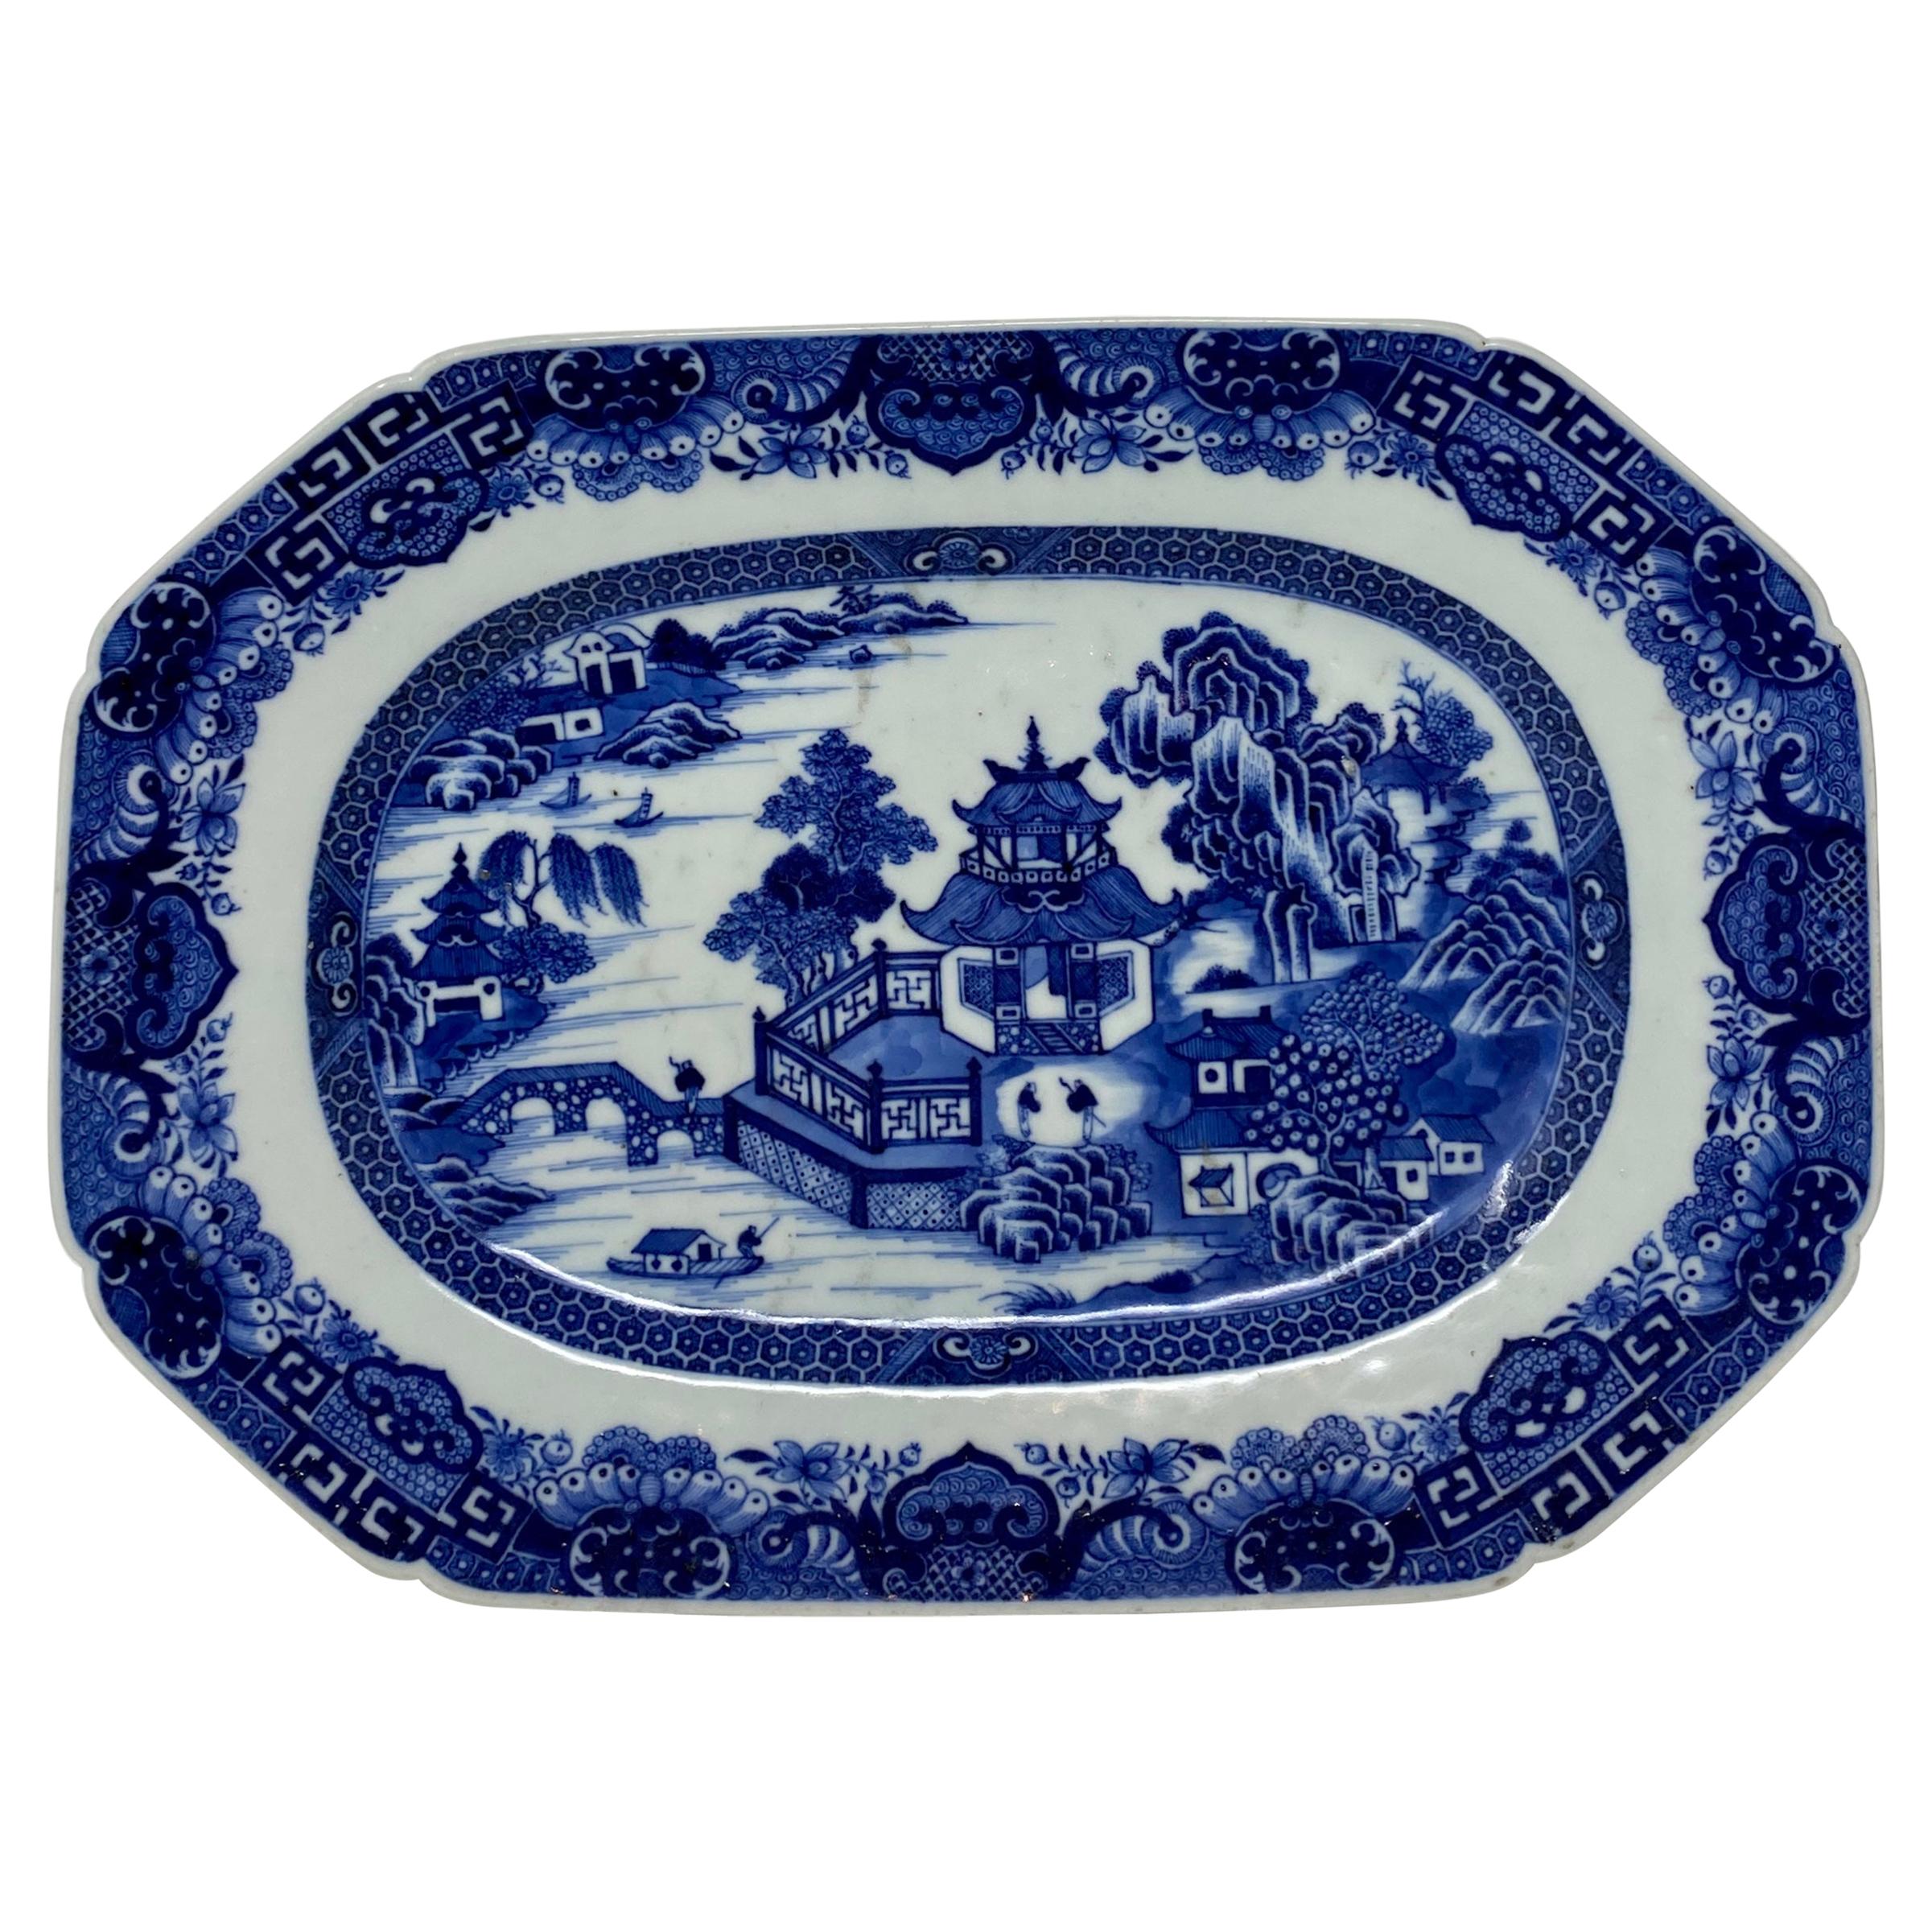 Antique Chinese Export "Blue & White" Platter, circa 1780-1800